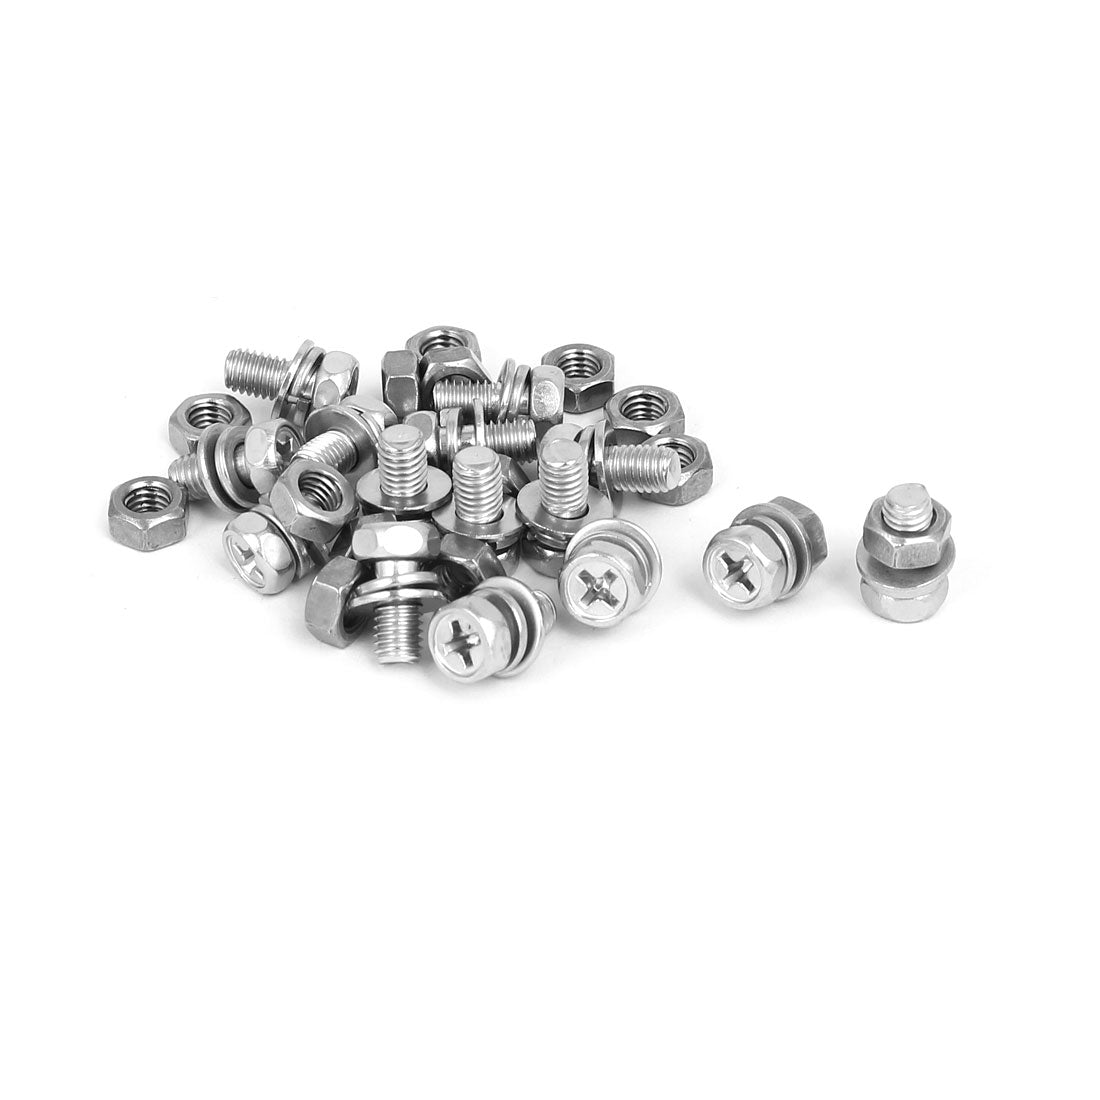 uxcell Uxcell M5 x 10mm 304 Stainless Steel Phillips Hex Head Bolts Nuts W Washers 15 Sets